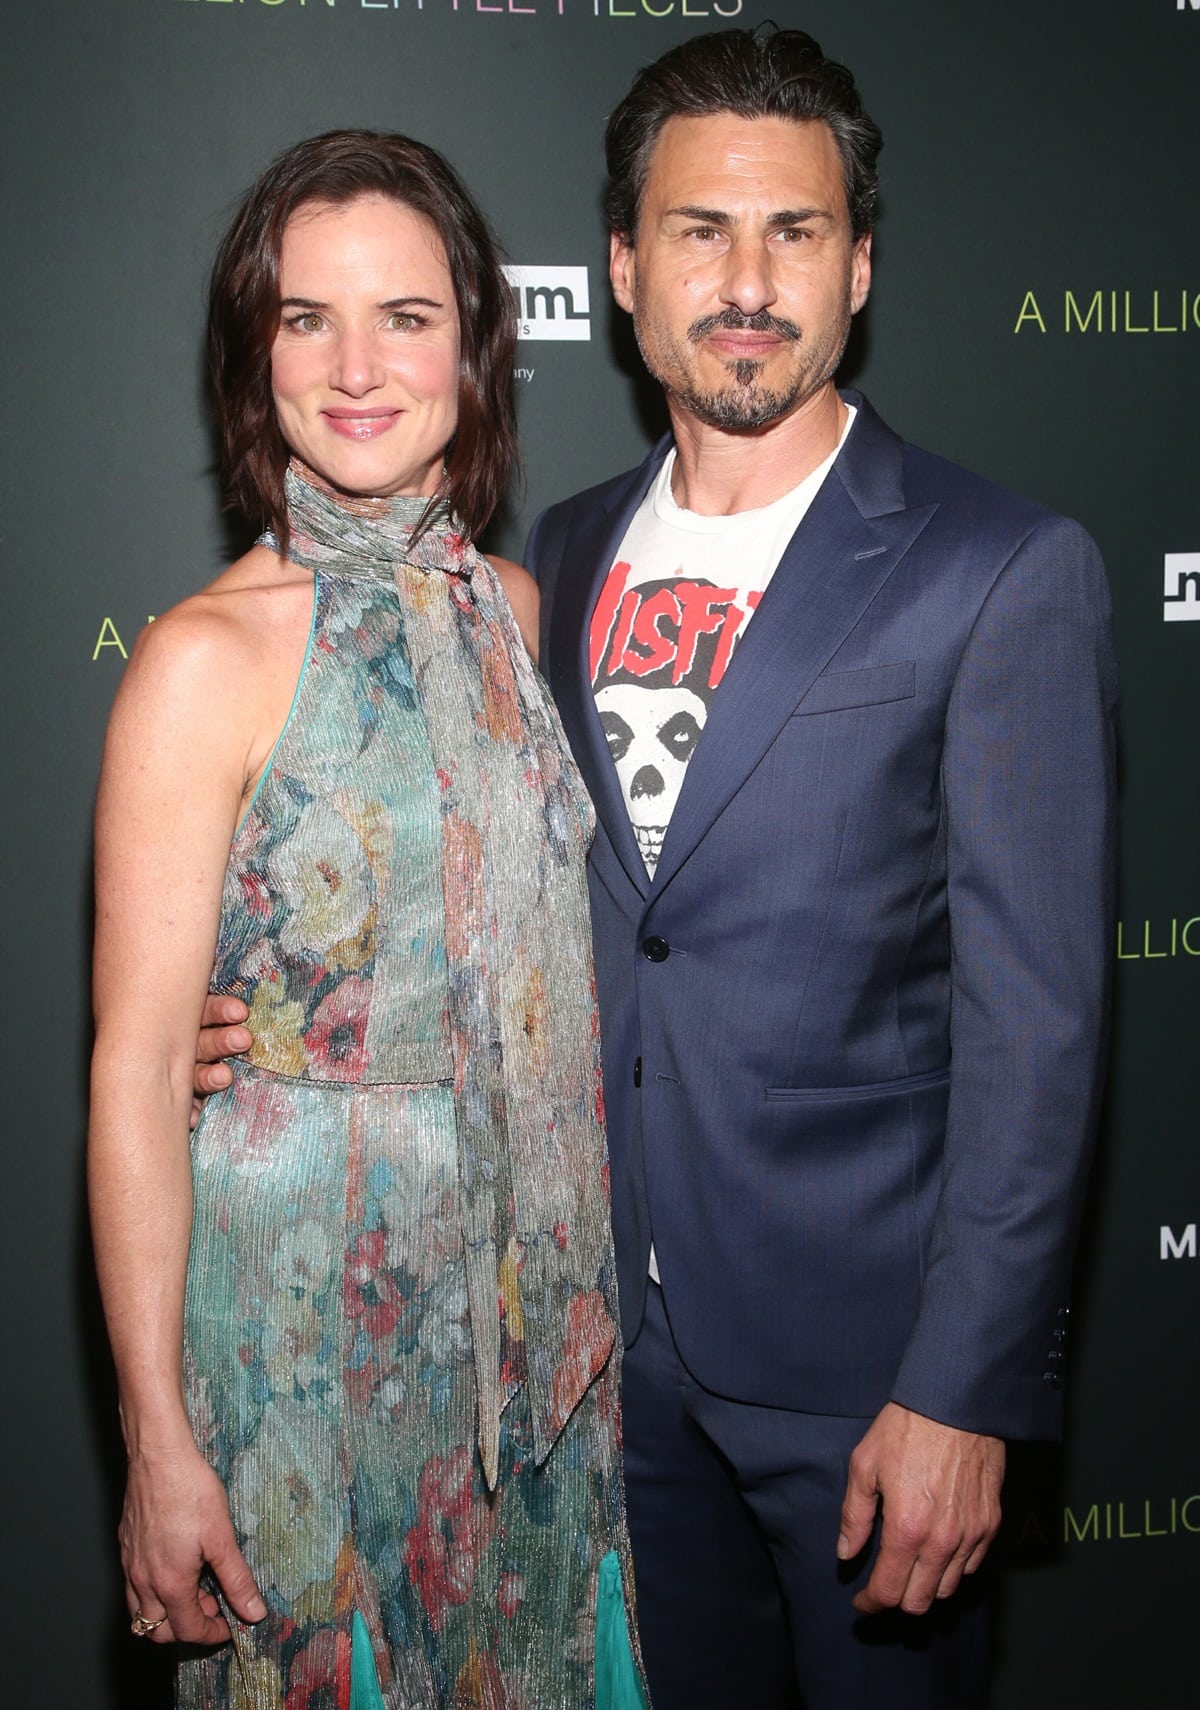 Juliette Lewis and Brad Wilk, who dated from 2016 to 2020, attended the special screening of "A Million Little Pieces" at The London Hotel in West Hollywood, California, on December 4, 2019